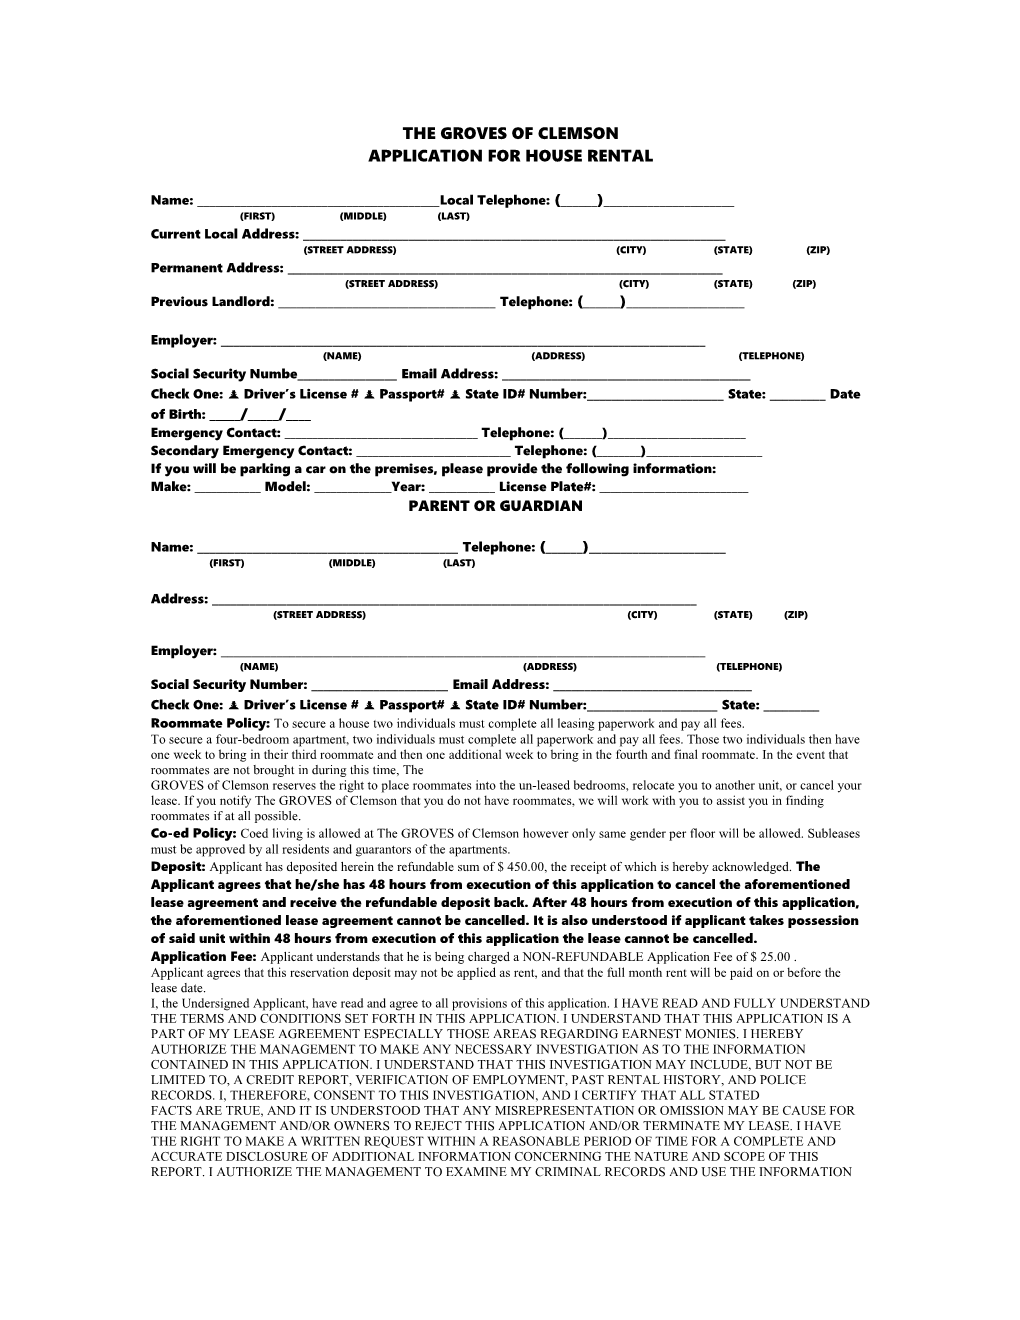 Application for House Rental